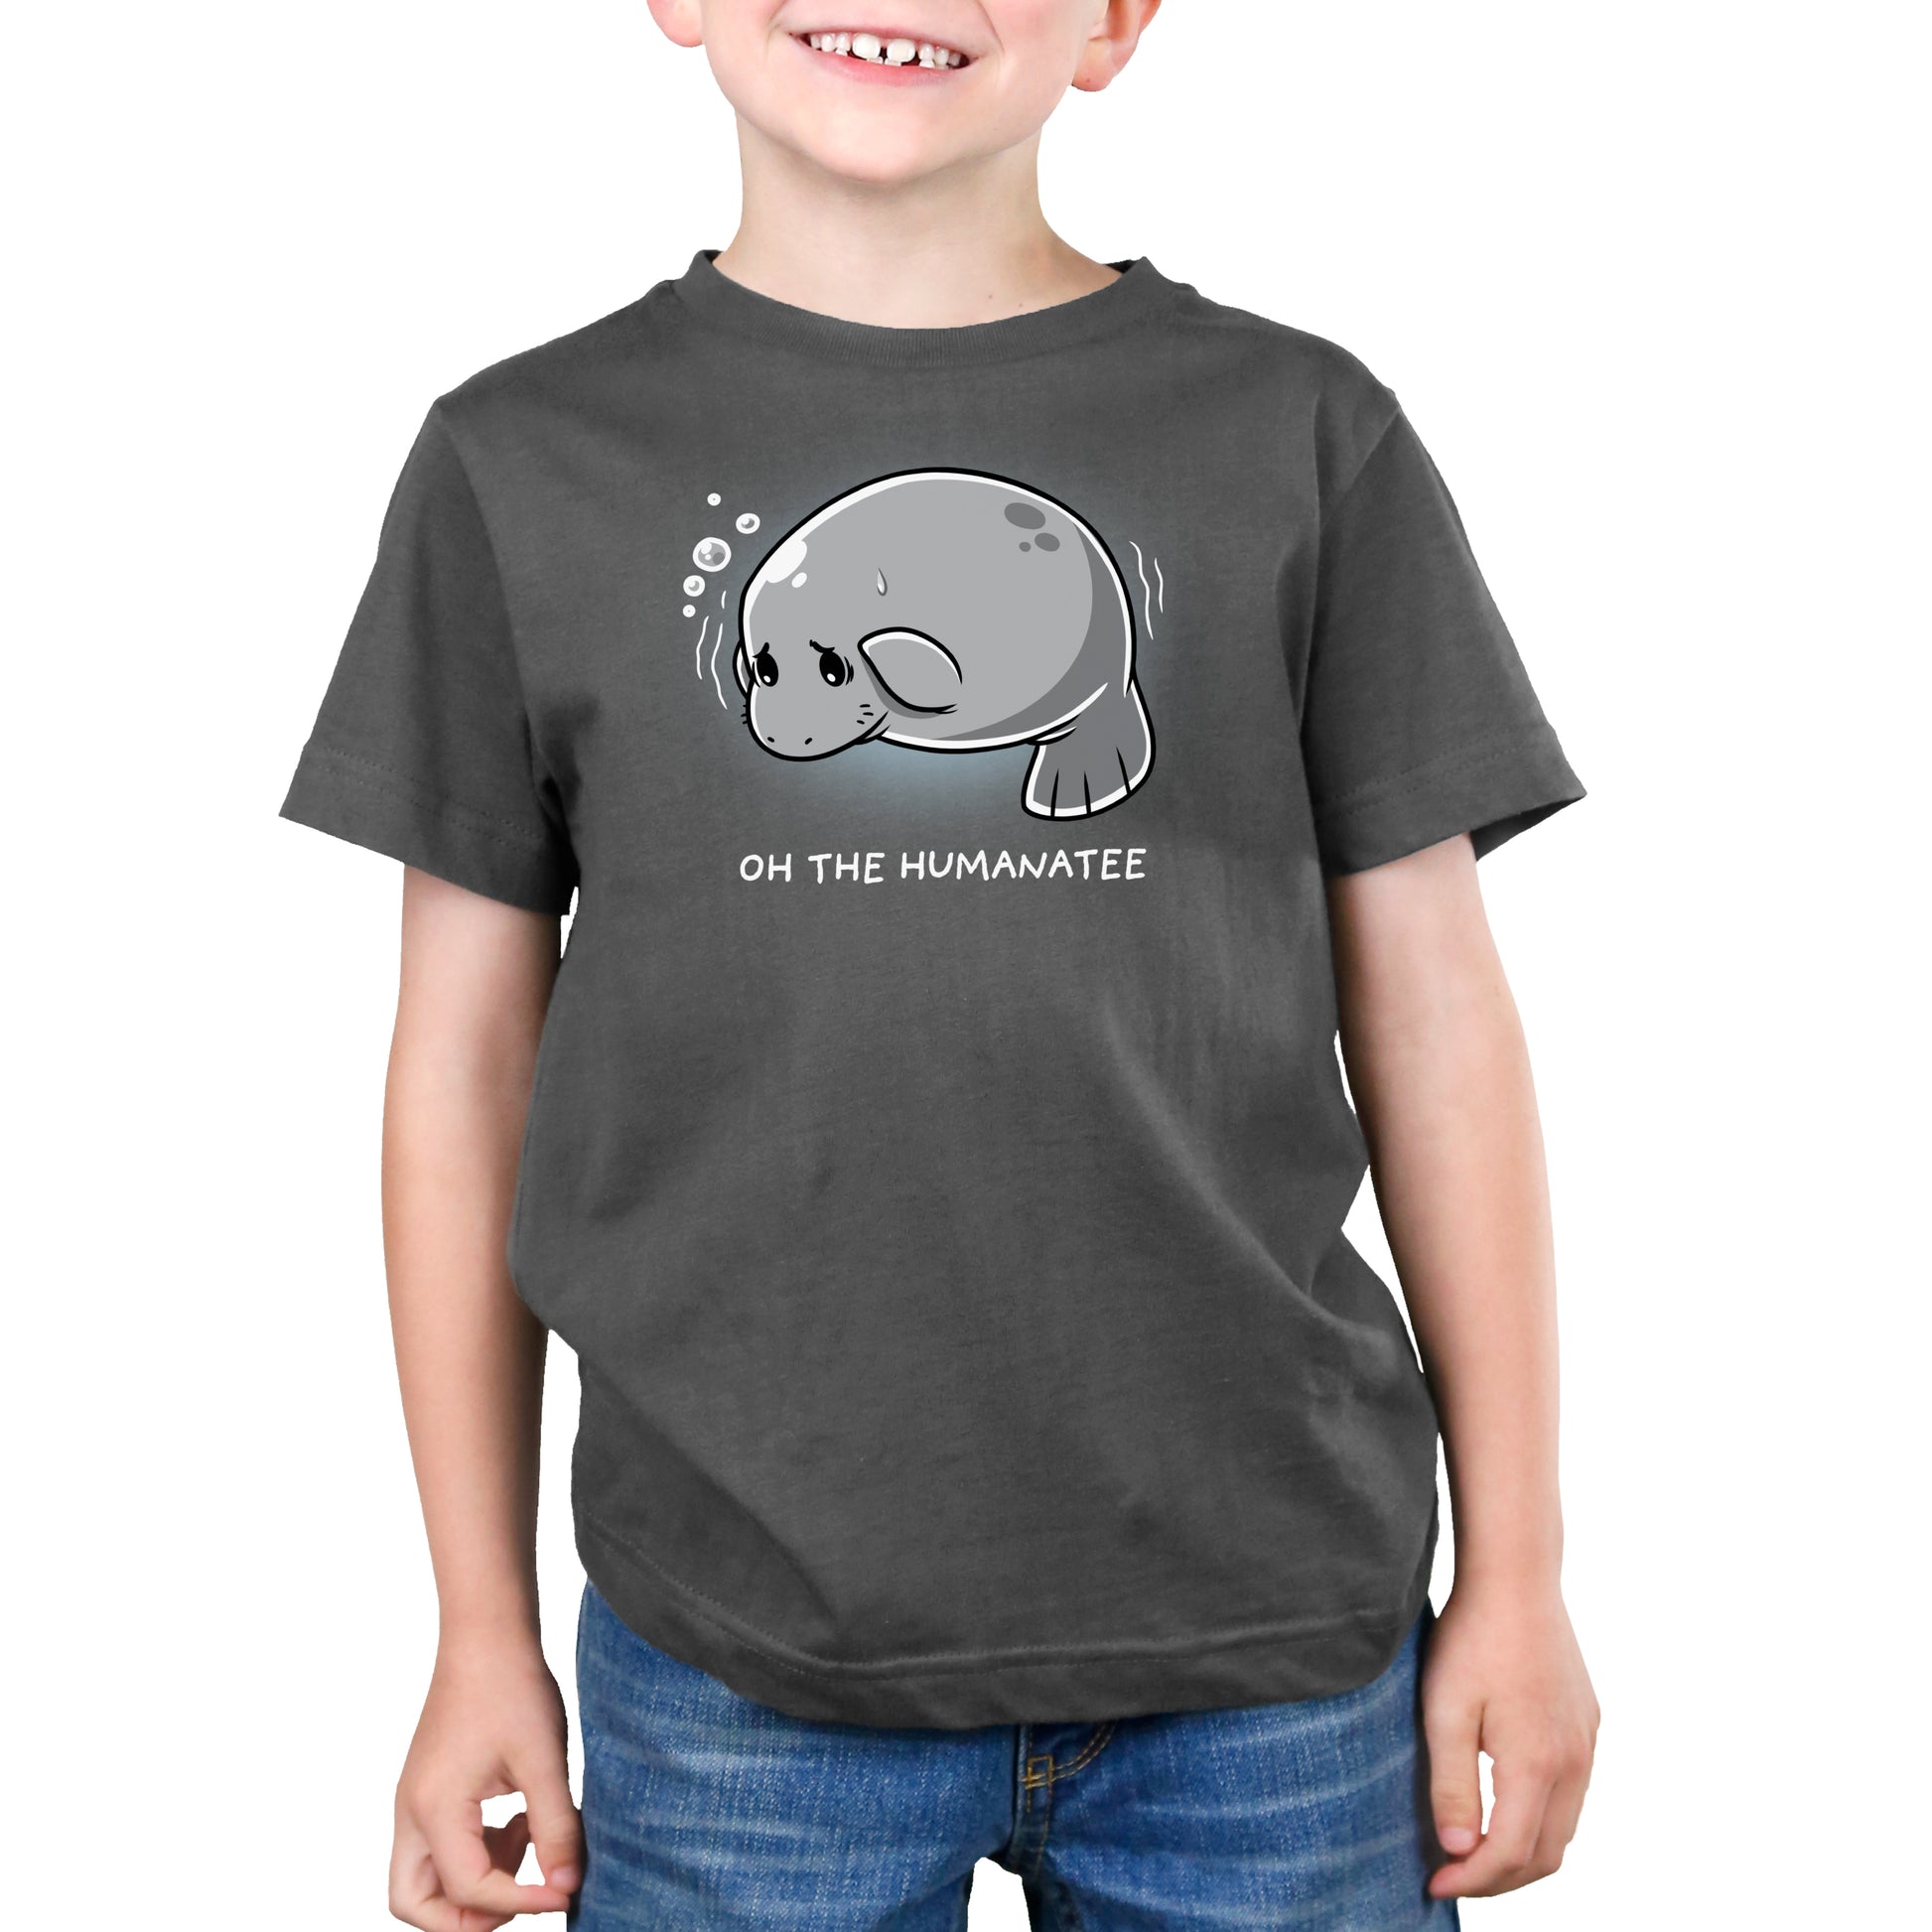 Premium Cotton T-shirt - Child wearing a charcoal gray apparel, made of super soft ringspun cotton, featuring a cartoon manaapparelwith the text "Oh the Humanatee" underneath. The product is called "Oh the Humanatee" by monsterdigital.